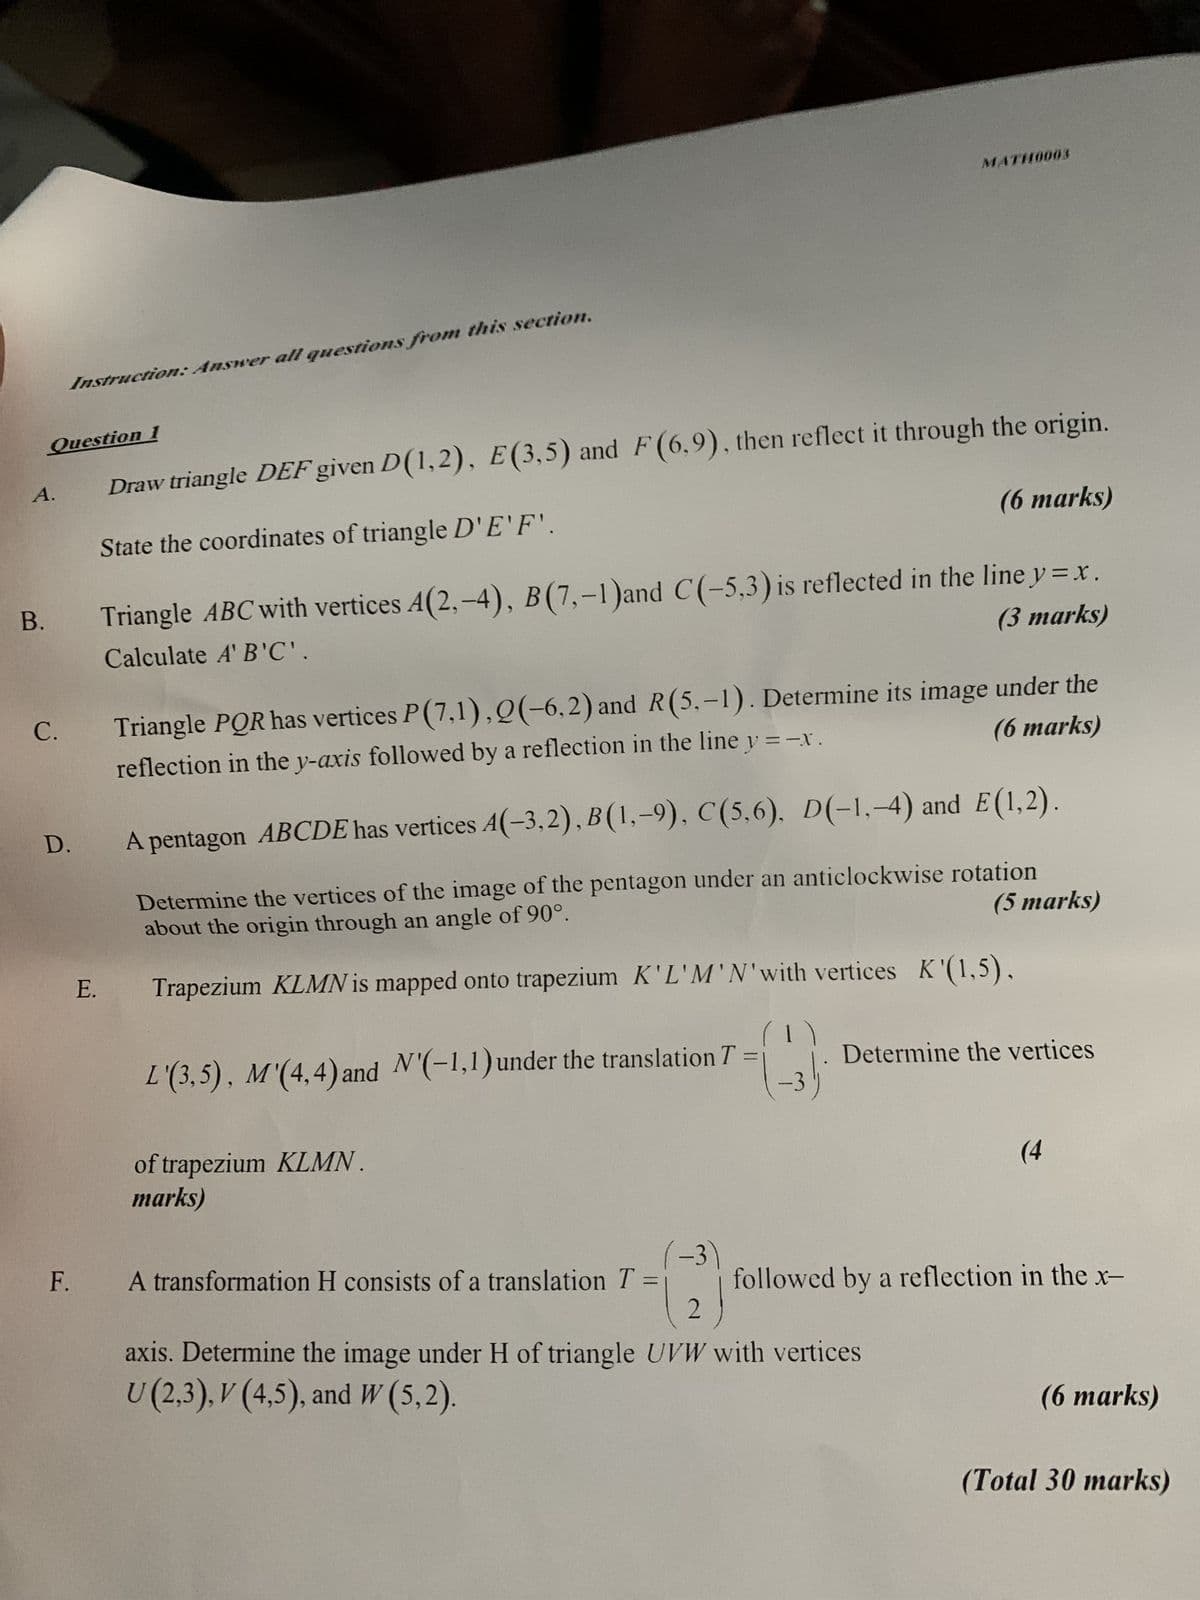 MATH10003
A.
Instruction: Answer all questions from this section.
Question 1
Draw triangle DEF given D(1,2), E(3,5) and F (6,9), then reflect it through the origin.
State the coordinates of triangle D'E'F'.
(6 marks)
B.
Calculate A'B'C'.
Triangle ABC with vertices A(2,-4), B(7,-1) and C(-5,3) is reflected in the line y=x.
(3 marks)
C.
Triangle PQR has vertices P(7,1), 2(-6,2) and R(5,-1). Determine its image under the
(6 marks)
reflection in the y-axis followed by a reflection in the line y = -x .
D.
A pentagon ABCDE has vertices A(-3,2), B(1,-9), C(5,6). D(-1,-4) and E(1,2).
Determine the vertices of the image of the pentagon under an anticlockwise rotation
about the origin through an angle of 90°.
(5 marks)
E. Trapezium KLMN is mapped onto trapezium K'L'M'N'with vertices K'(1,5),
L'(3,5), M'(4,4) and N'(-1,1) under the translation T =
(1)
Determine the vertices
of trapezium KLMN.
marks)
(4
(-3)
F.
A transformation H consists of a translation T
=
followed by a reflection in the x-
2
axis. Determine the image under H of triangle UVW with vertices
U (2,3), V (4,5), and W (5,2).
(6 marks)
(Total 30 marks)